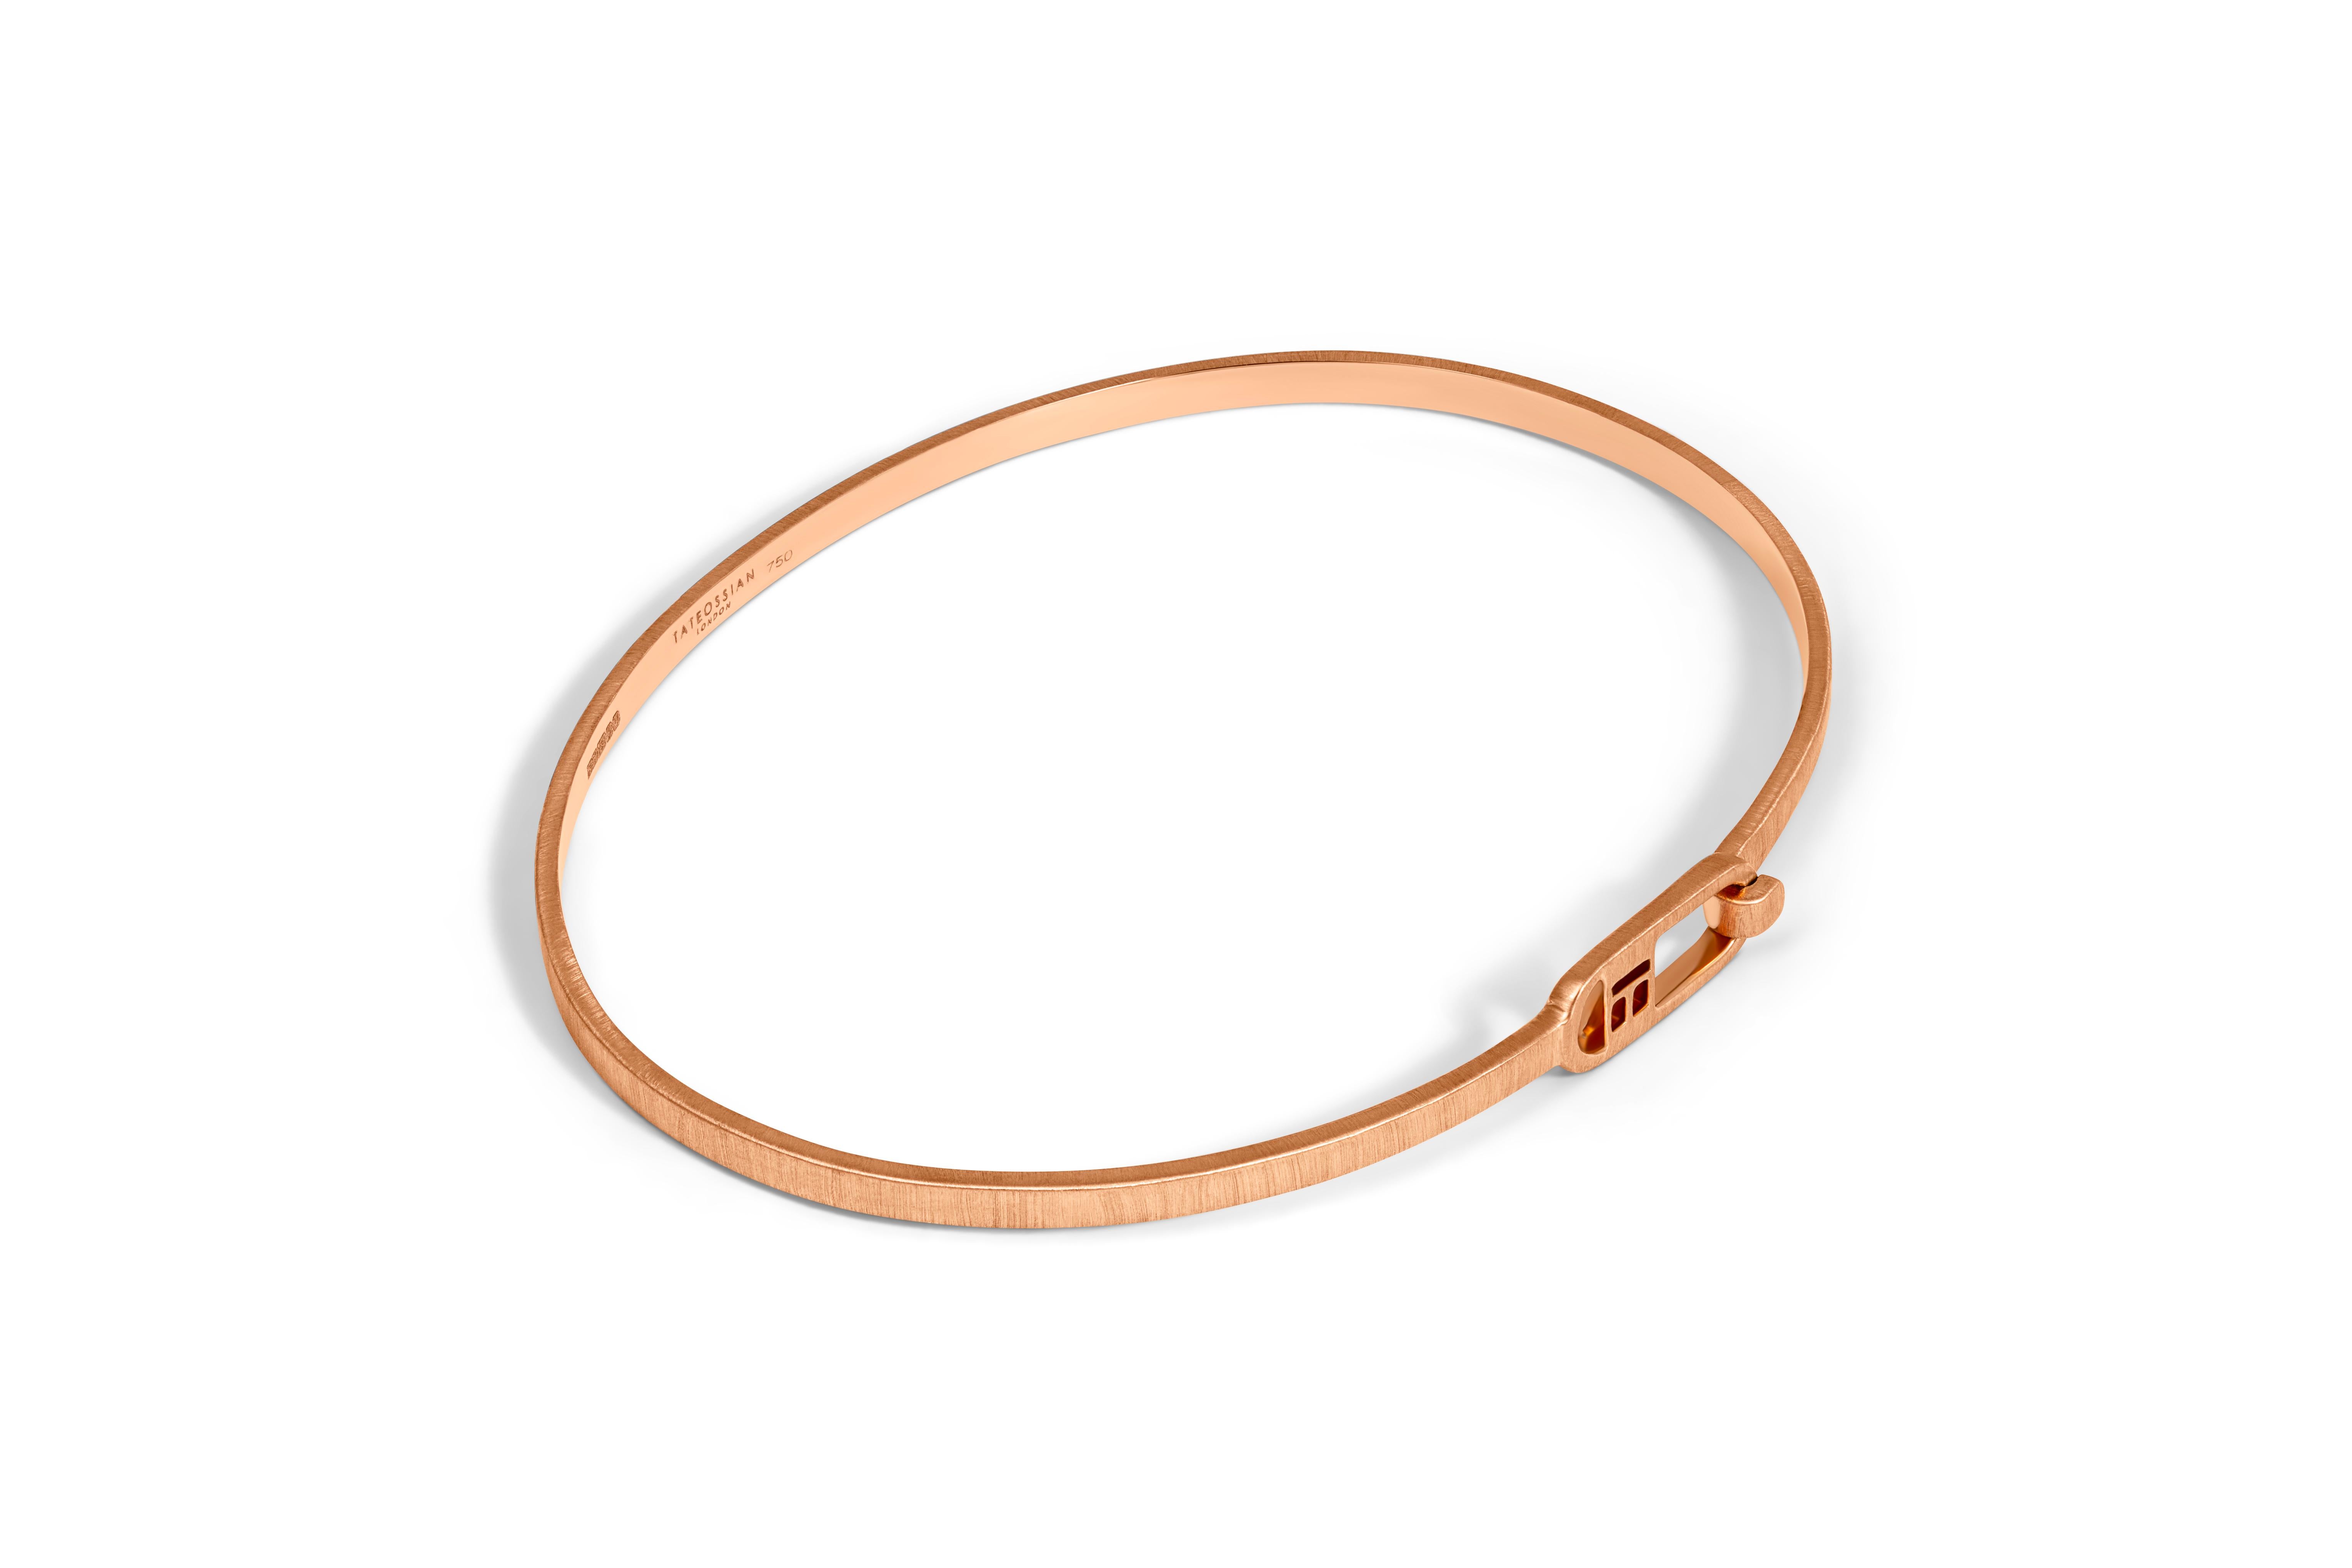 T-Bangle in Brushed 18K Rose Gold, Size L

The ultra-thin, brushed bangle is perfect for those with a minimalistic style, made to stack with any bracelet or watch. Featuring a simple hook and loop closure with Tateossian-logo detailing. Decorate